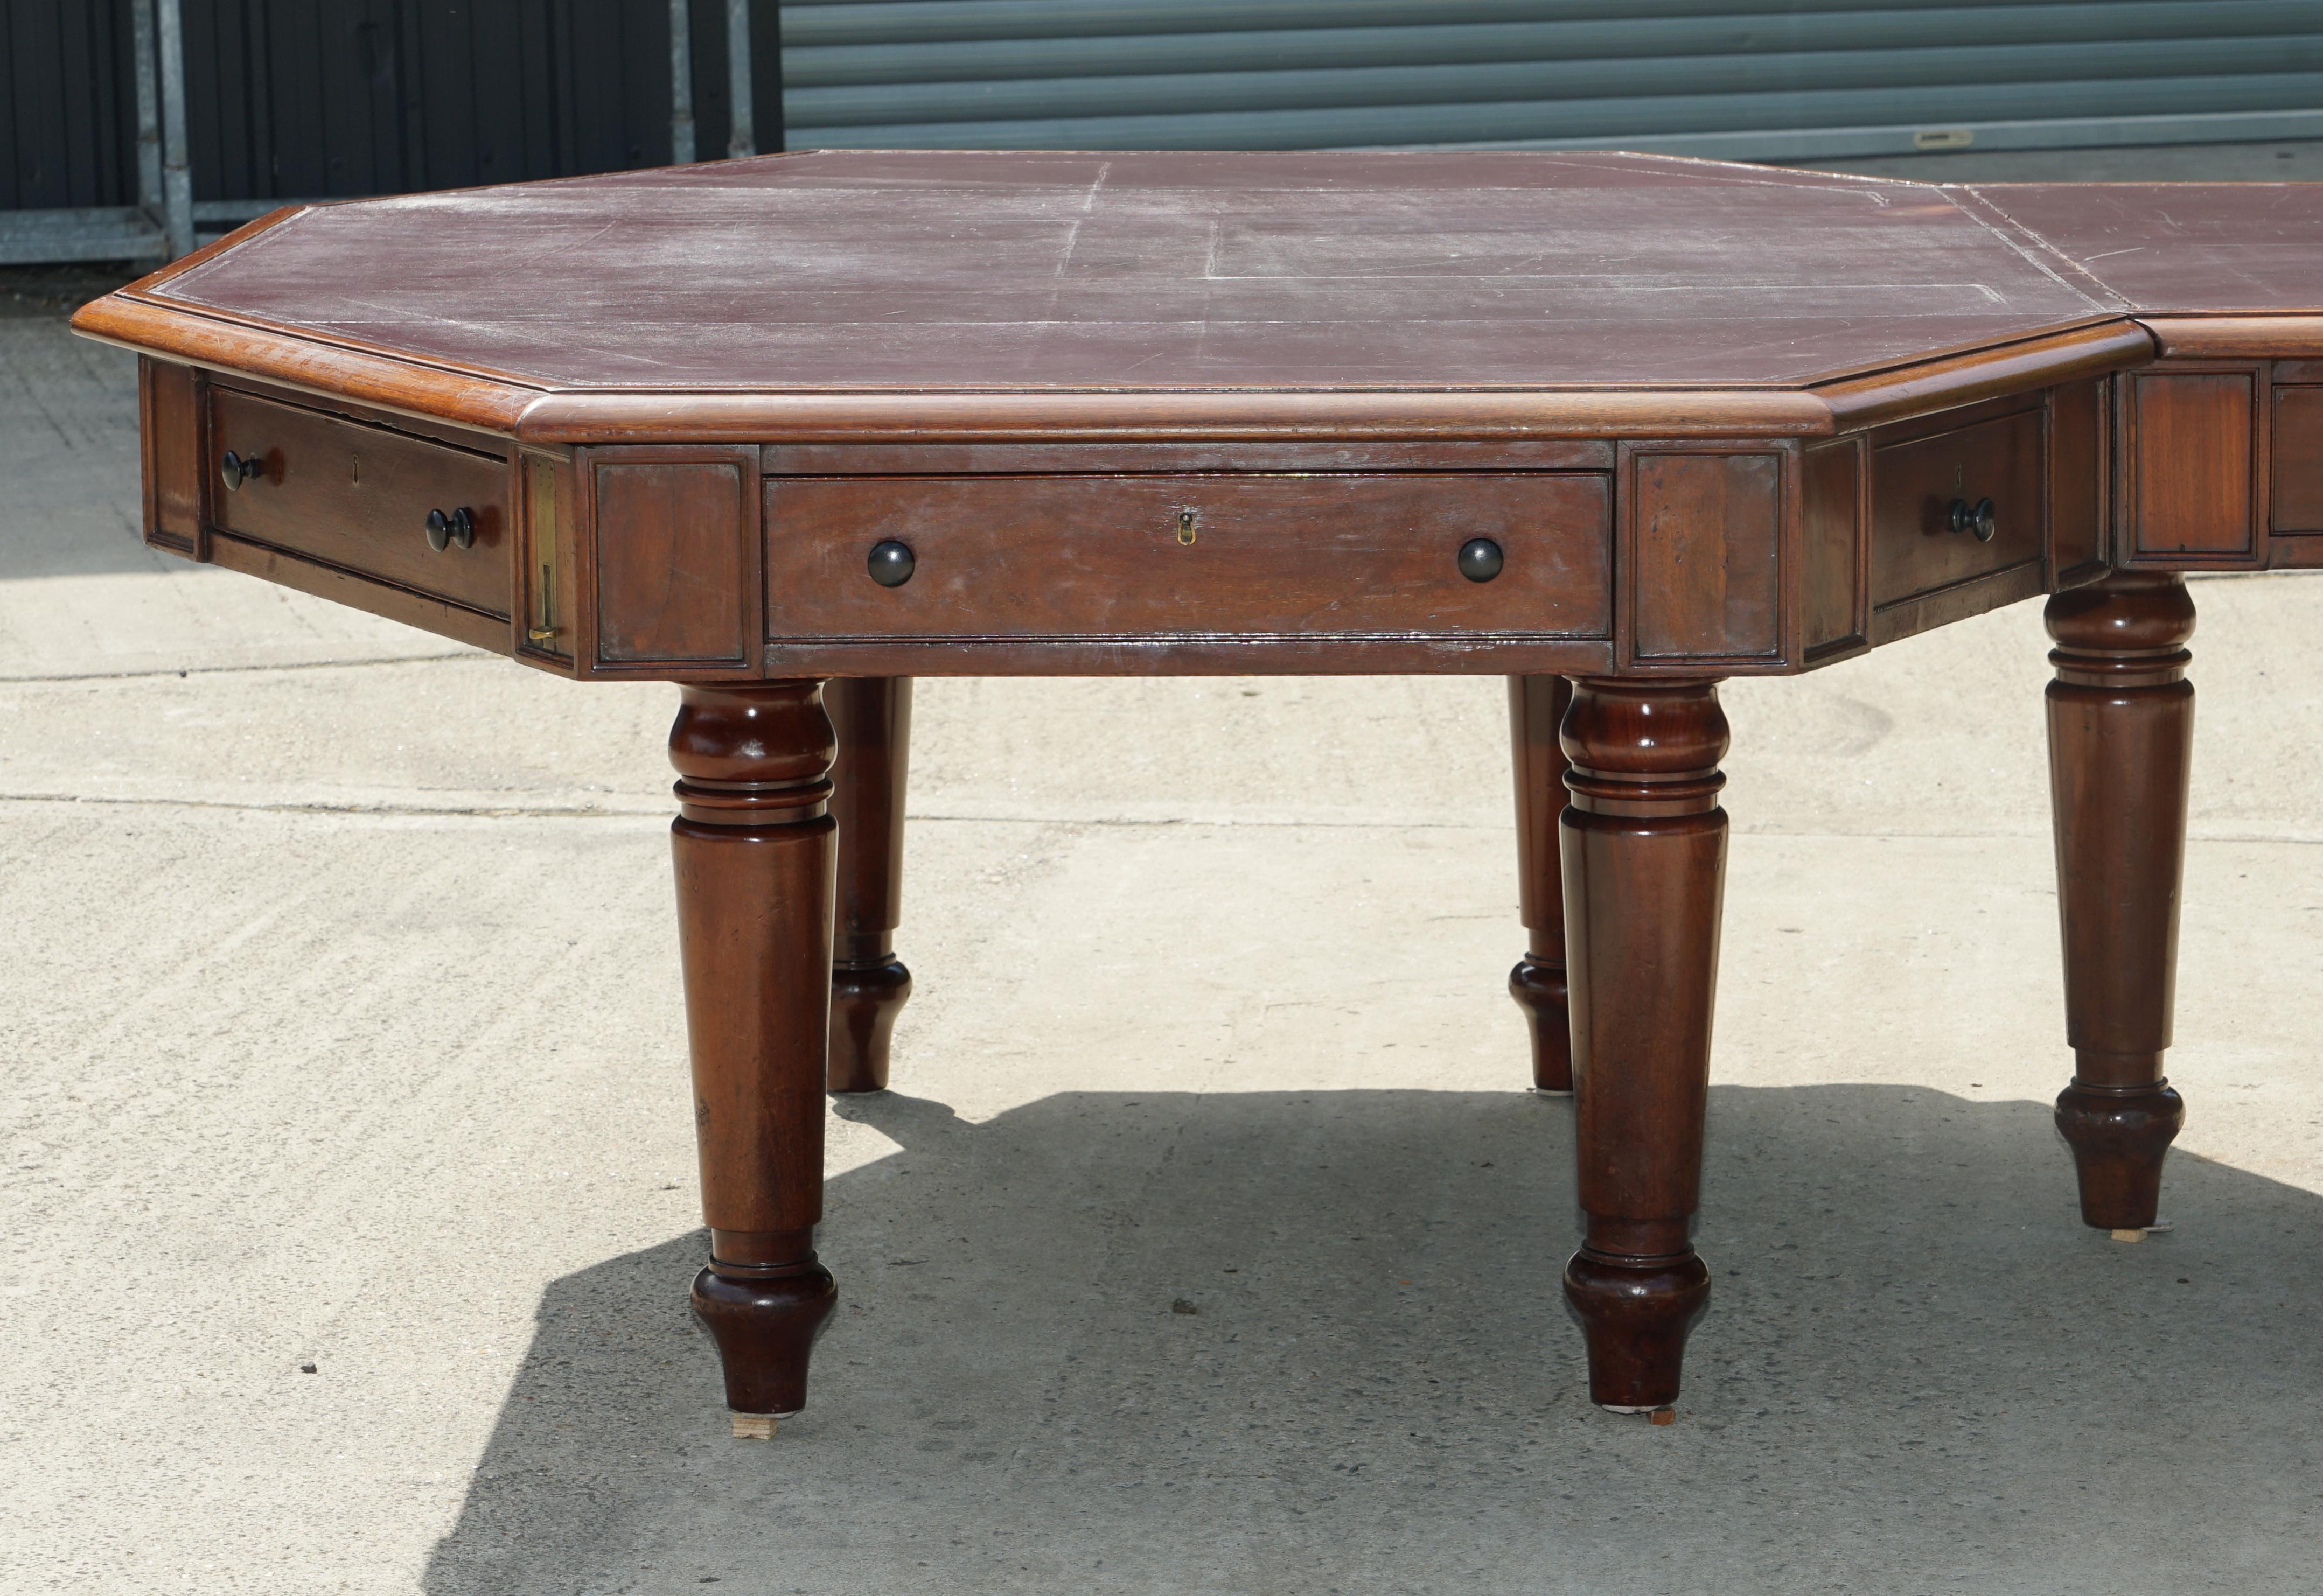 We are delighted to offer for sale this exquisite George III circa 1780-1800 extra large Library table writing desk with period George Rex stamped locks 

This piece will honestly leave you speechless, firstly, it is enormous, both in width and